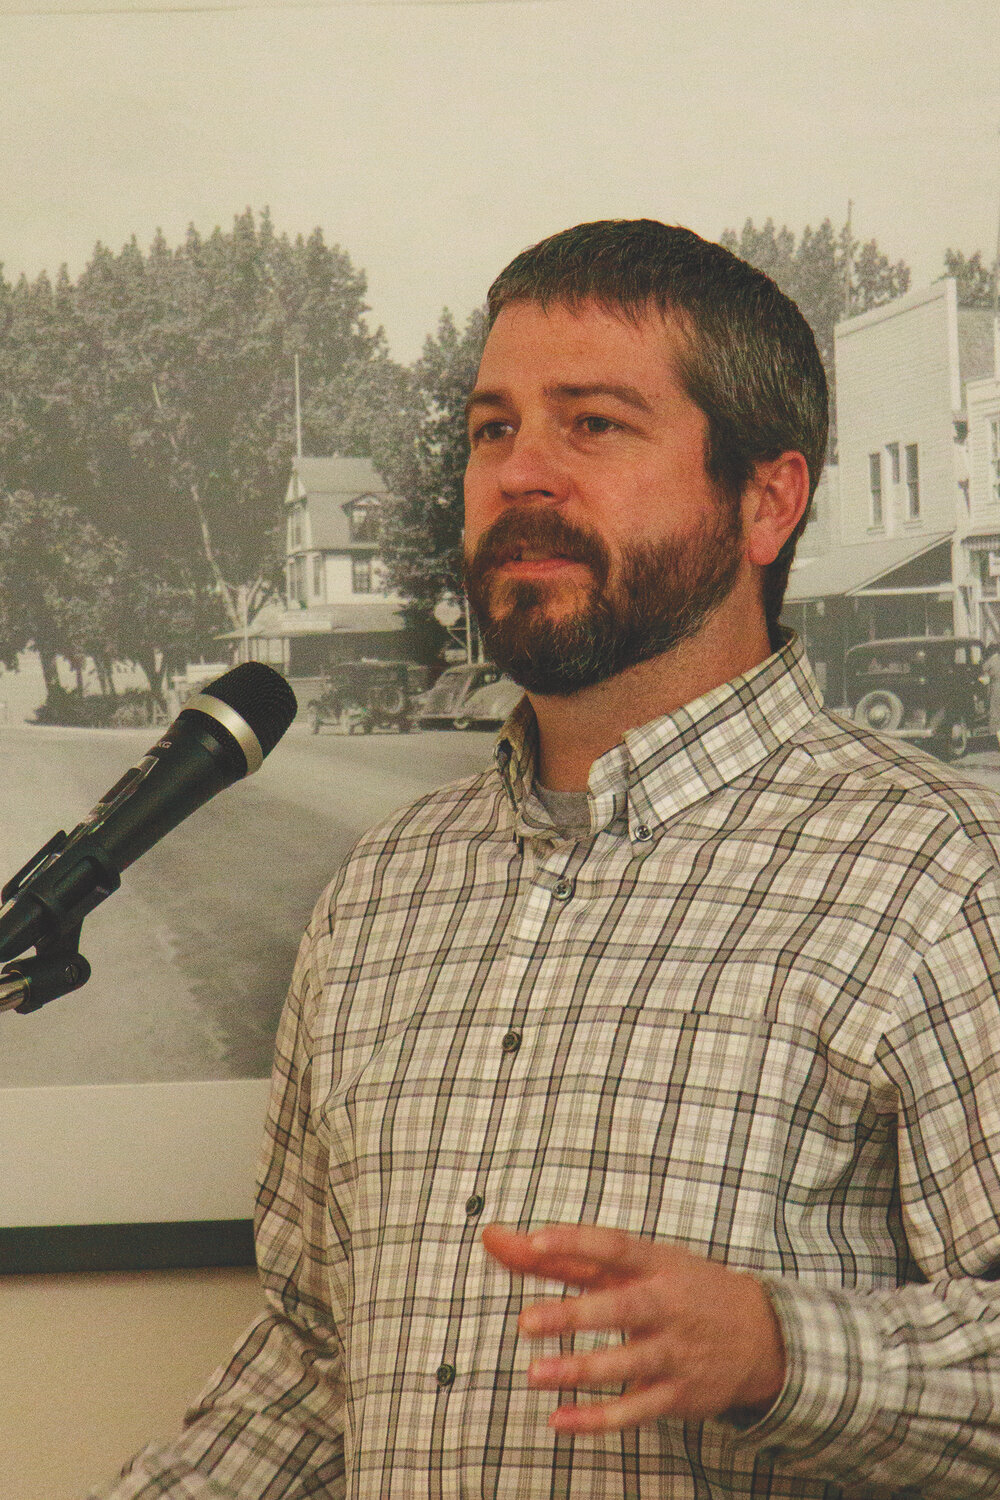 Chad Rissman, Chelan County PUD Director of Engineering and Asset Management explains the extreme growth of high-density loads in communities.